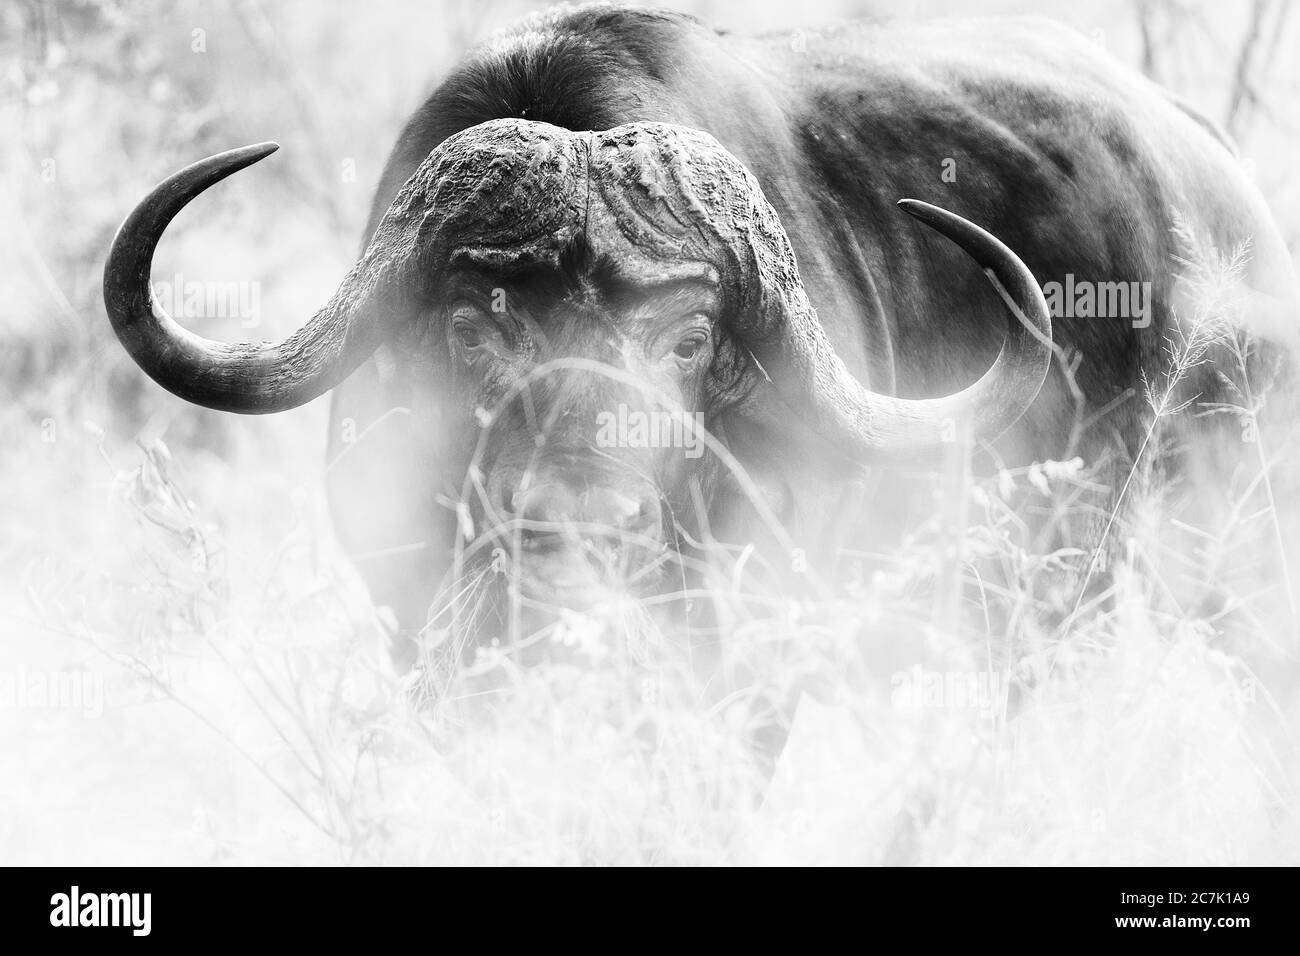 Cape Buffalo in Sabi Sands, A cape buffalo among the tall grass of the bushveld in Sabi Sands Reserve of the Greater Kruger National Park system, Stock Photo